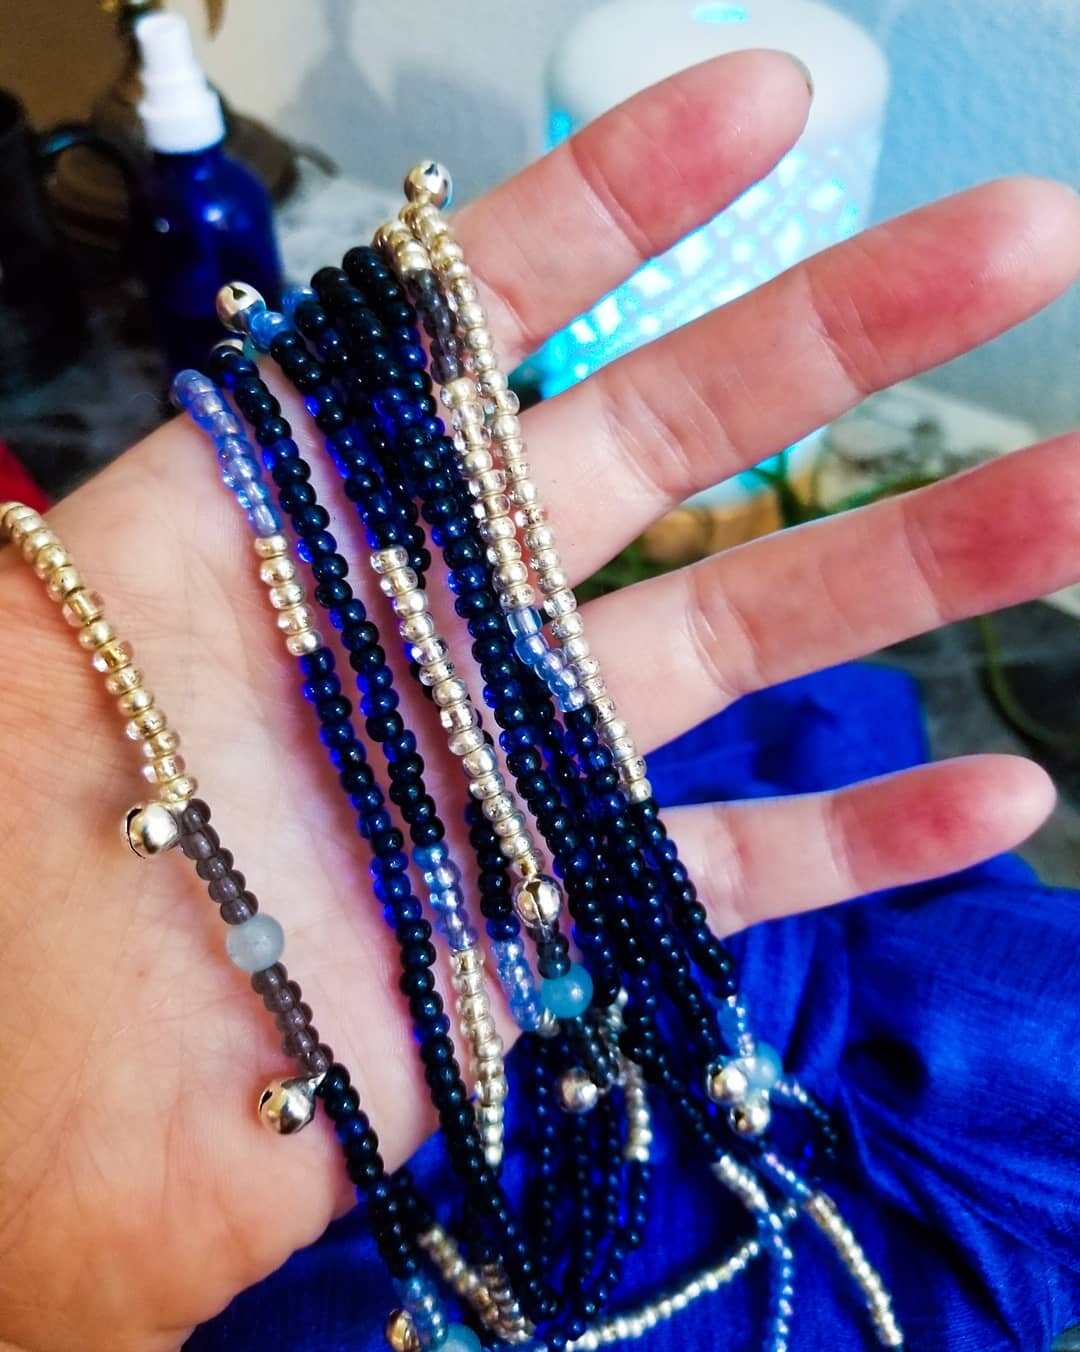 Beautiful bespoke waist beads created by @sundaespeaks for yours truly! The beads are all my favorite blues, and the silver chimes are the icing on the cake.
I'm using them to help myself stay in the present moment and not get stuck in my own head. H